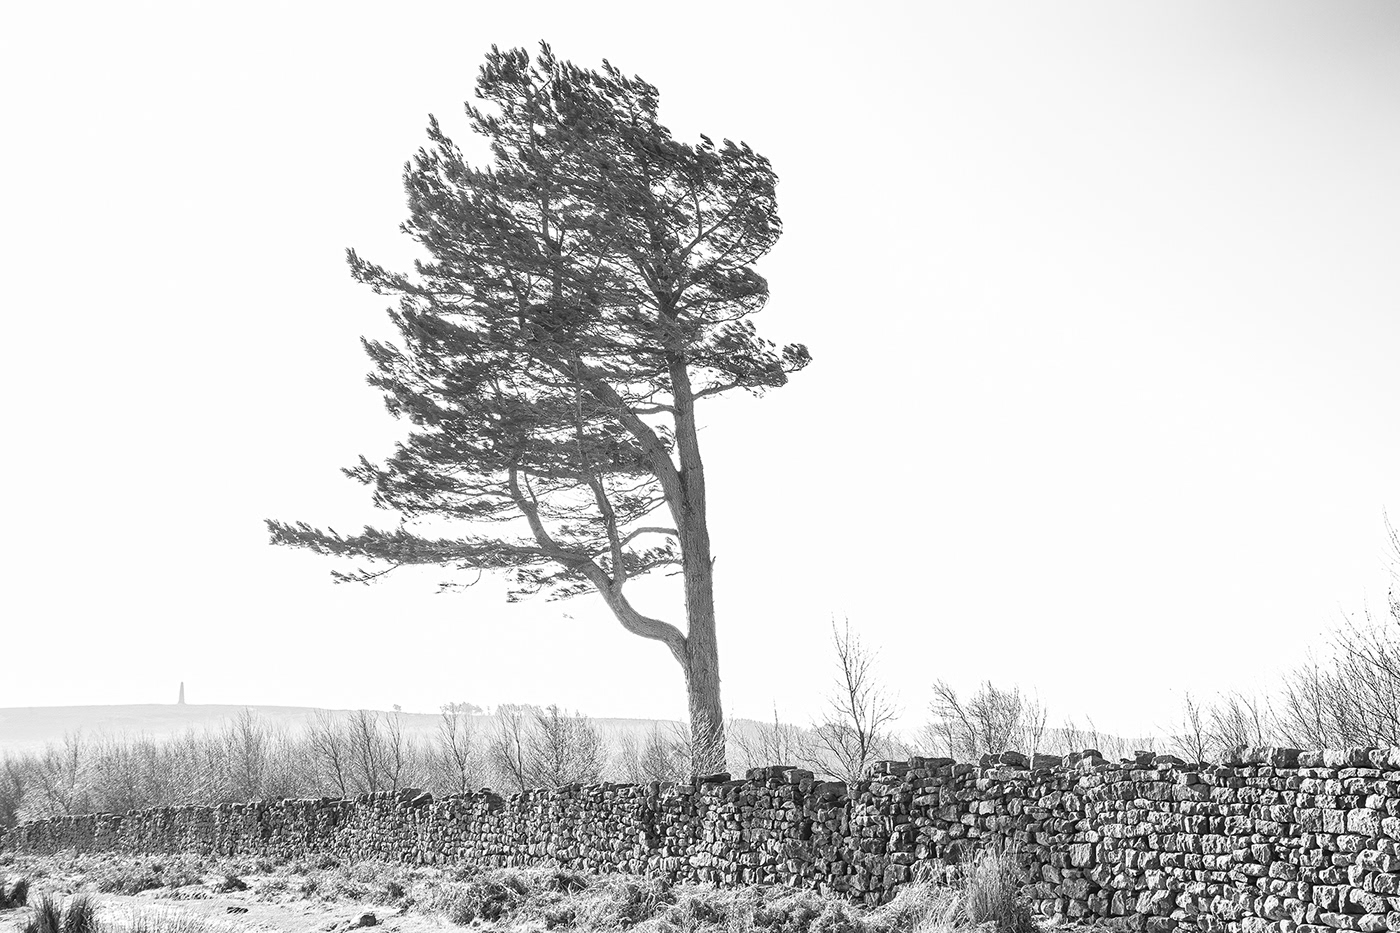 Outdoor Photography  Nature beauty Landscape yorkshire black and white monochrome views Roseberry Topping